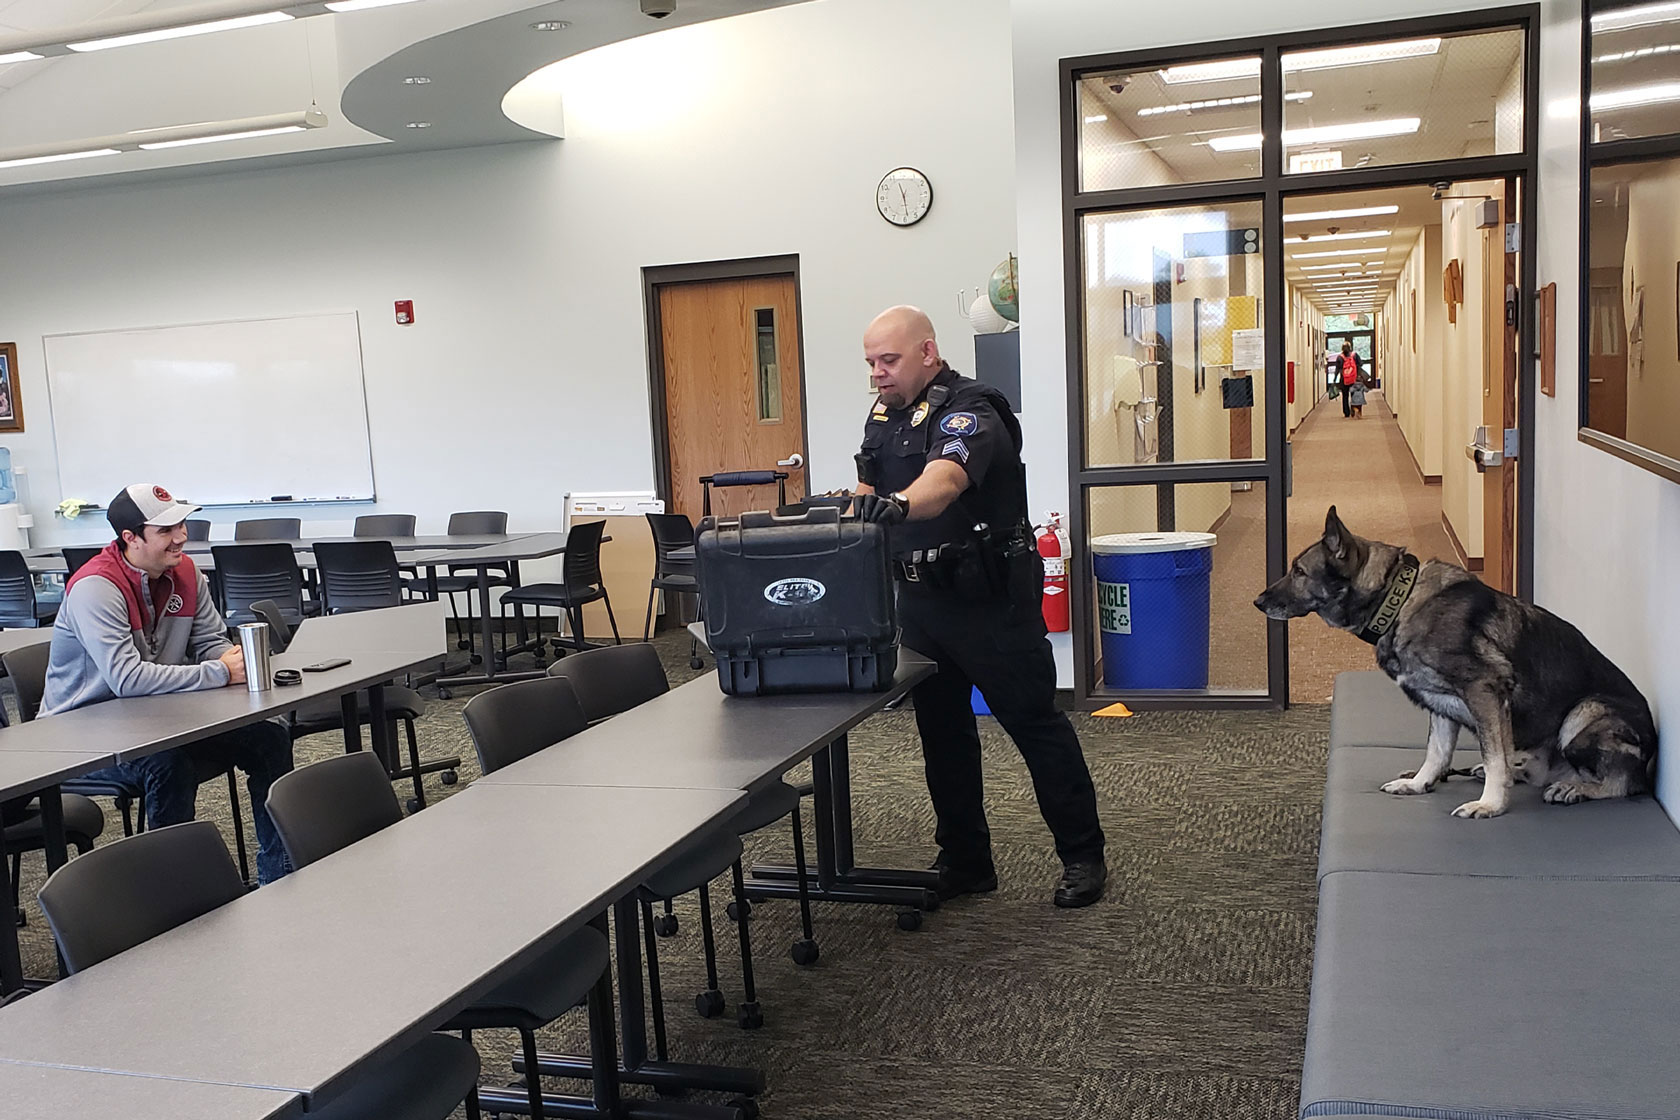 Jamie Allen of the White Earth Police Department conducts a demonstration for LLTC students.